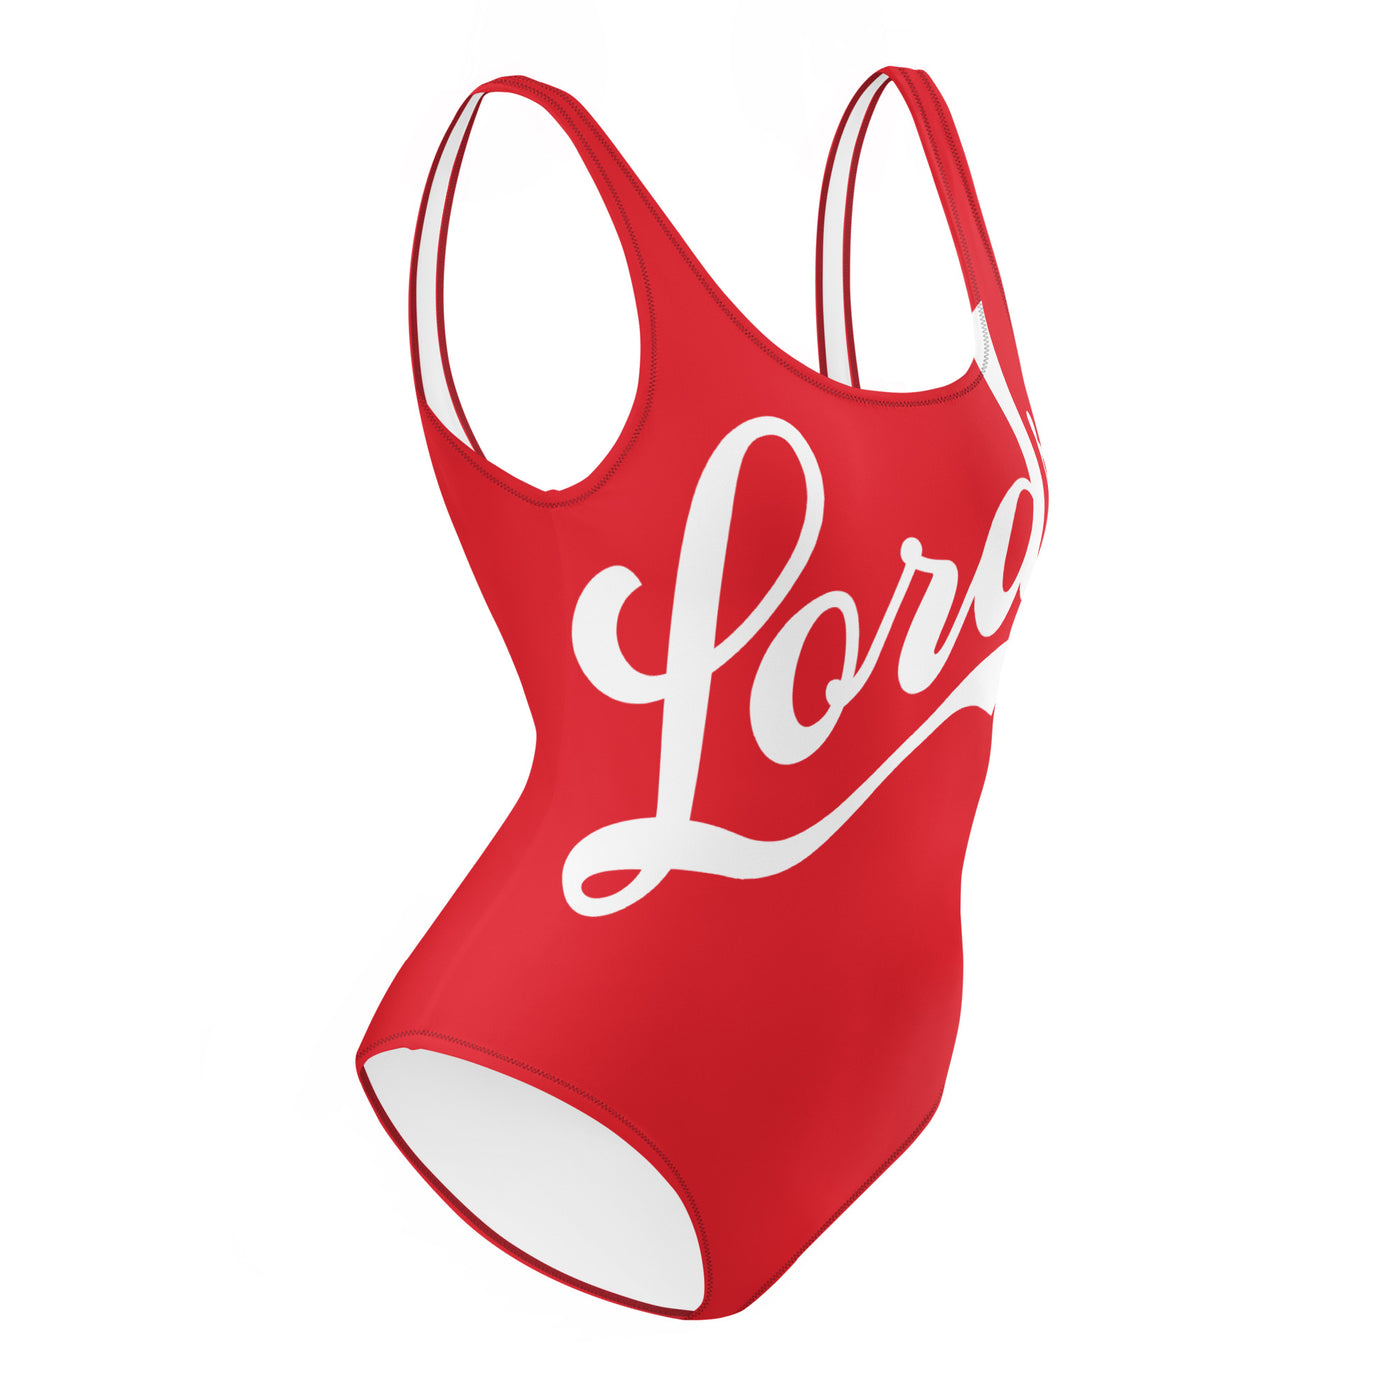 Team Lords Swimsuit - Red